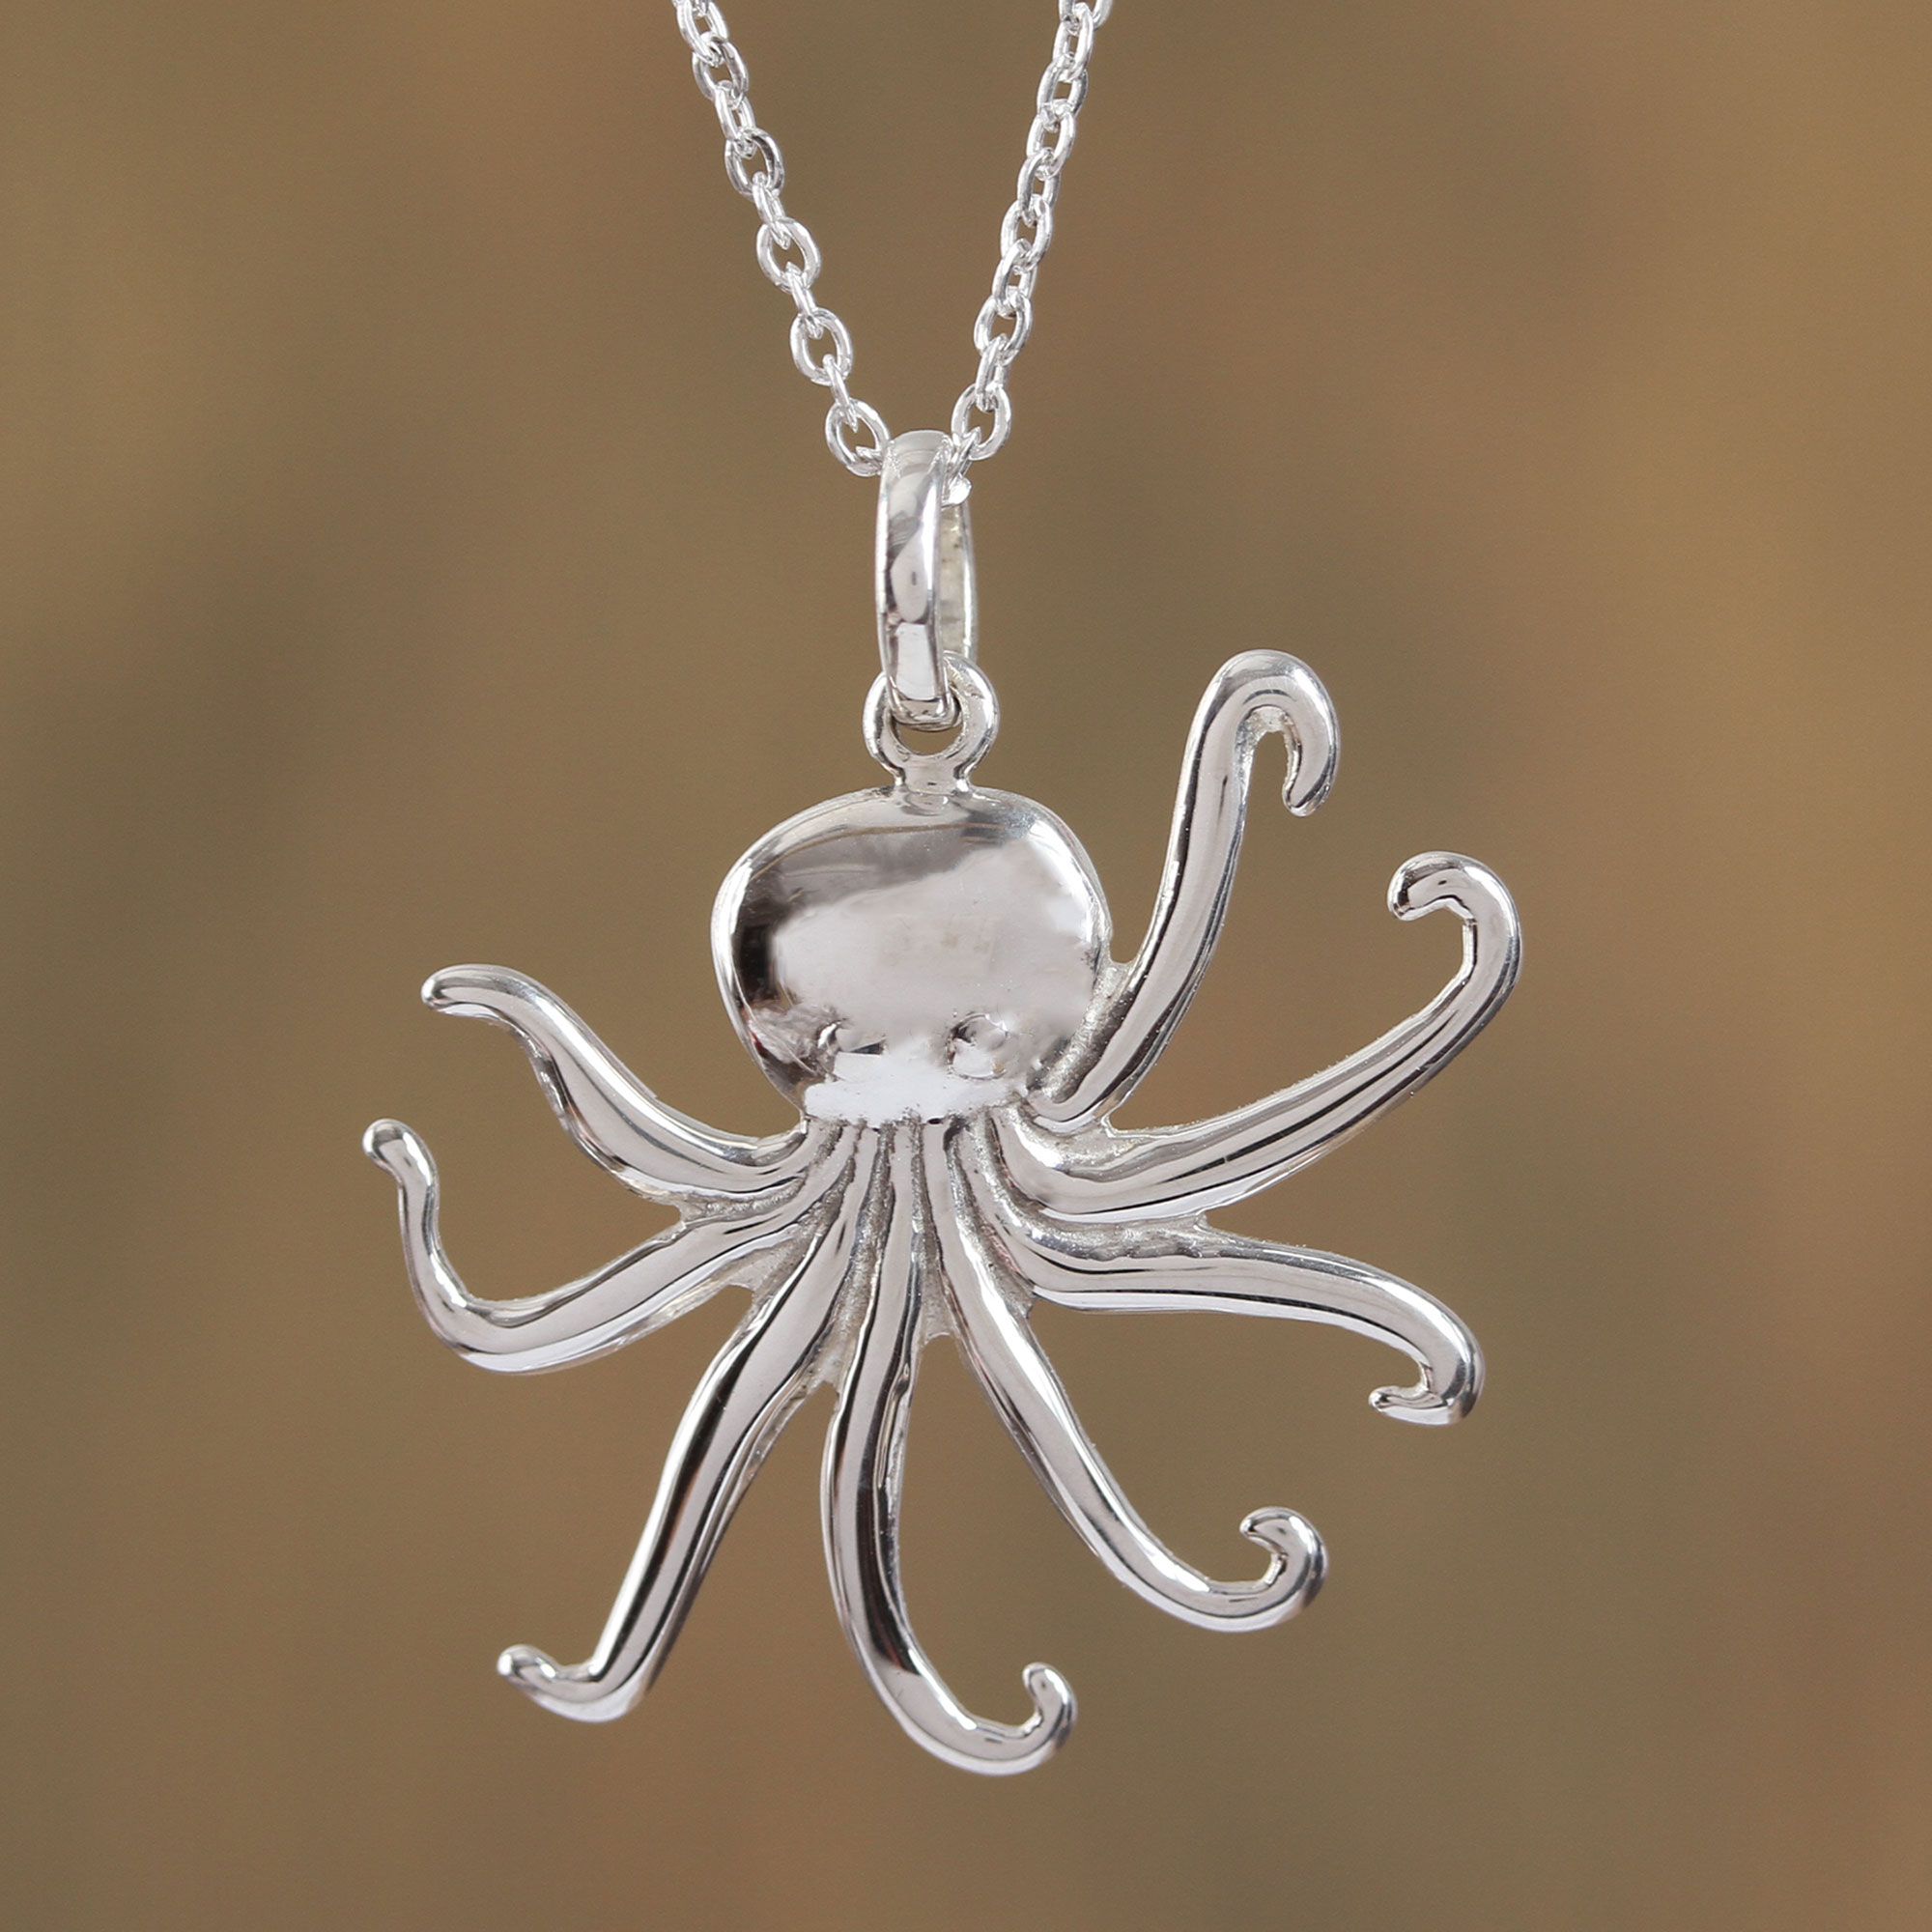 Octopus  necklace